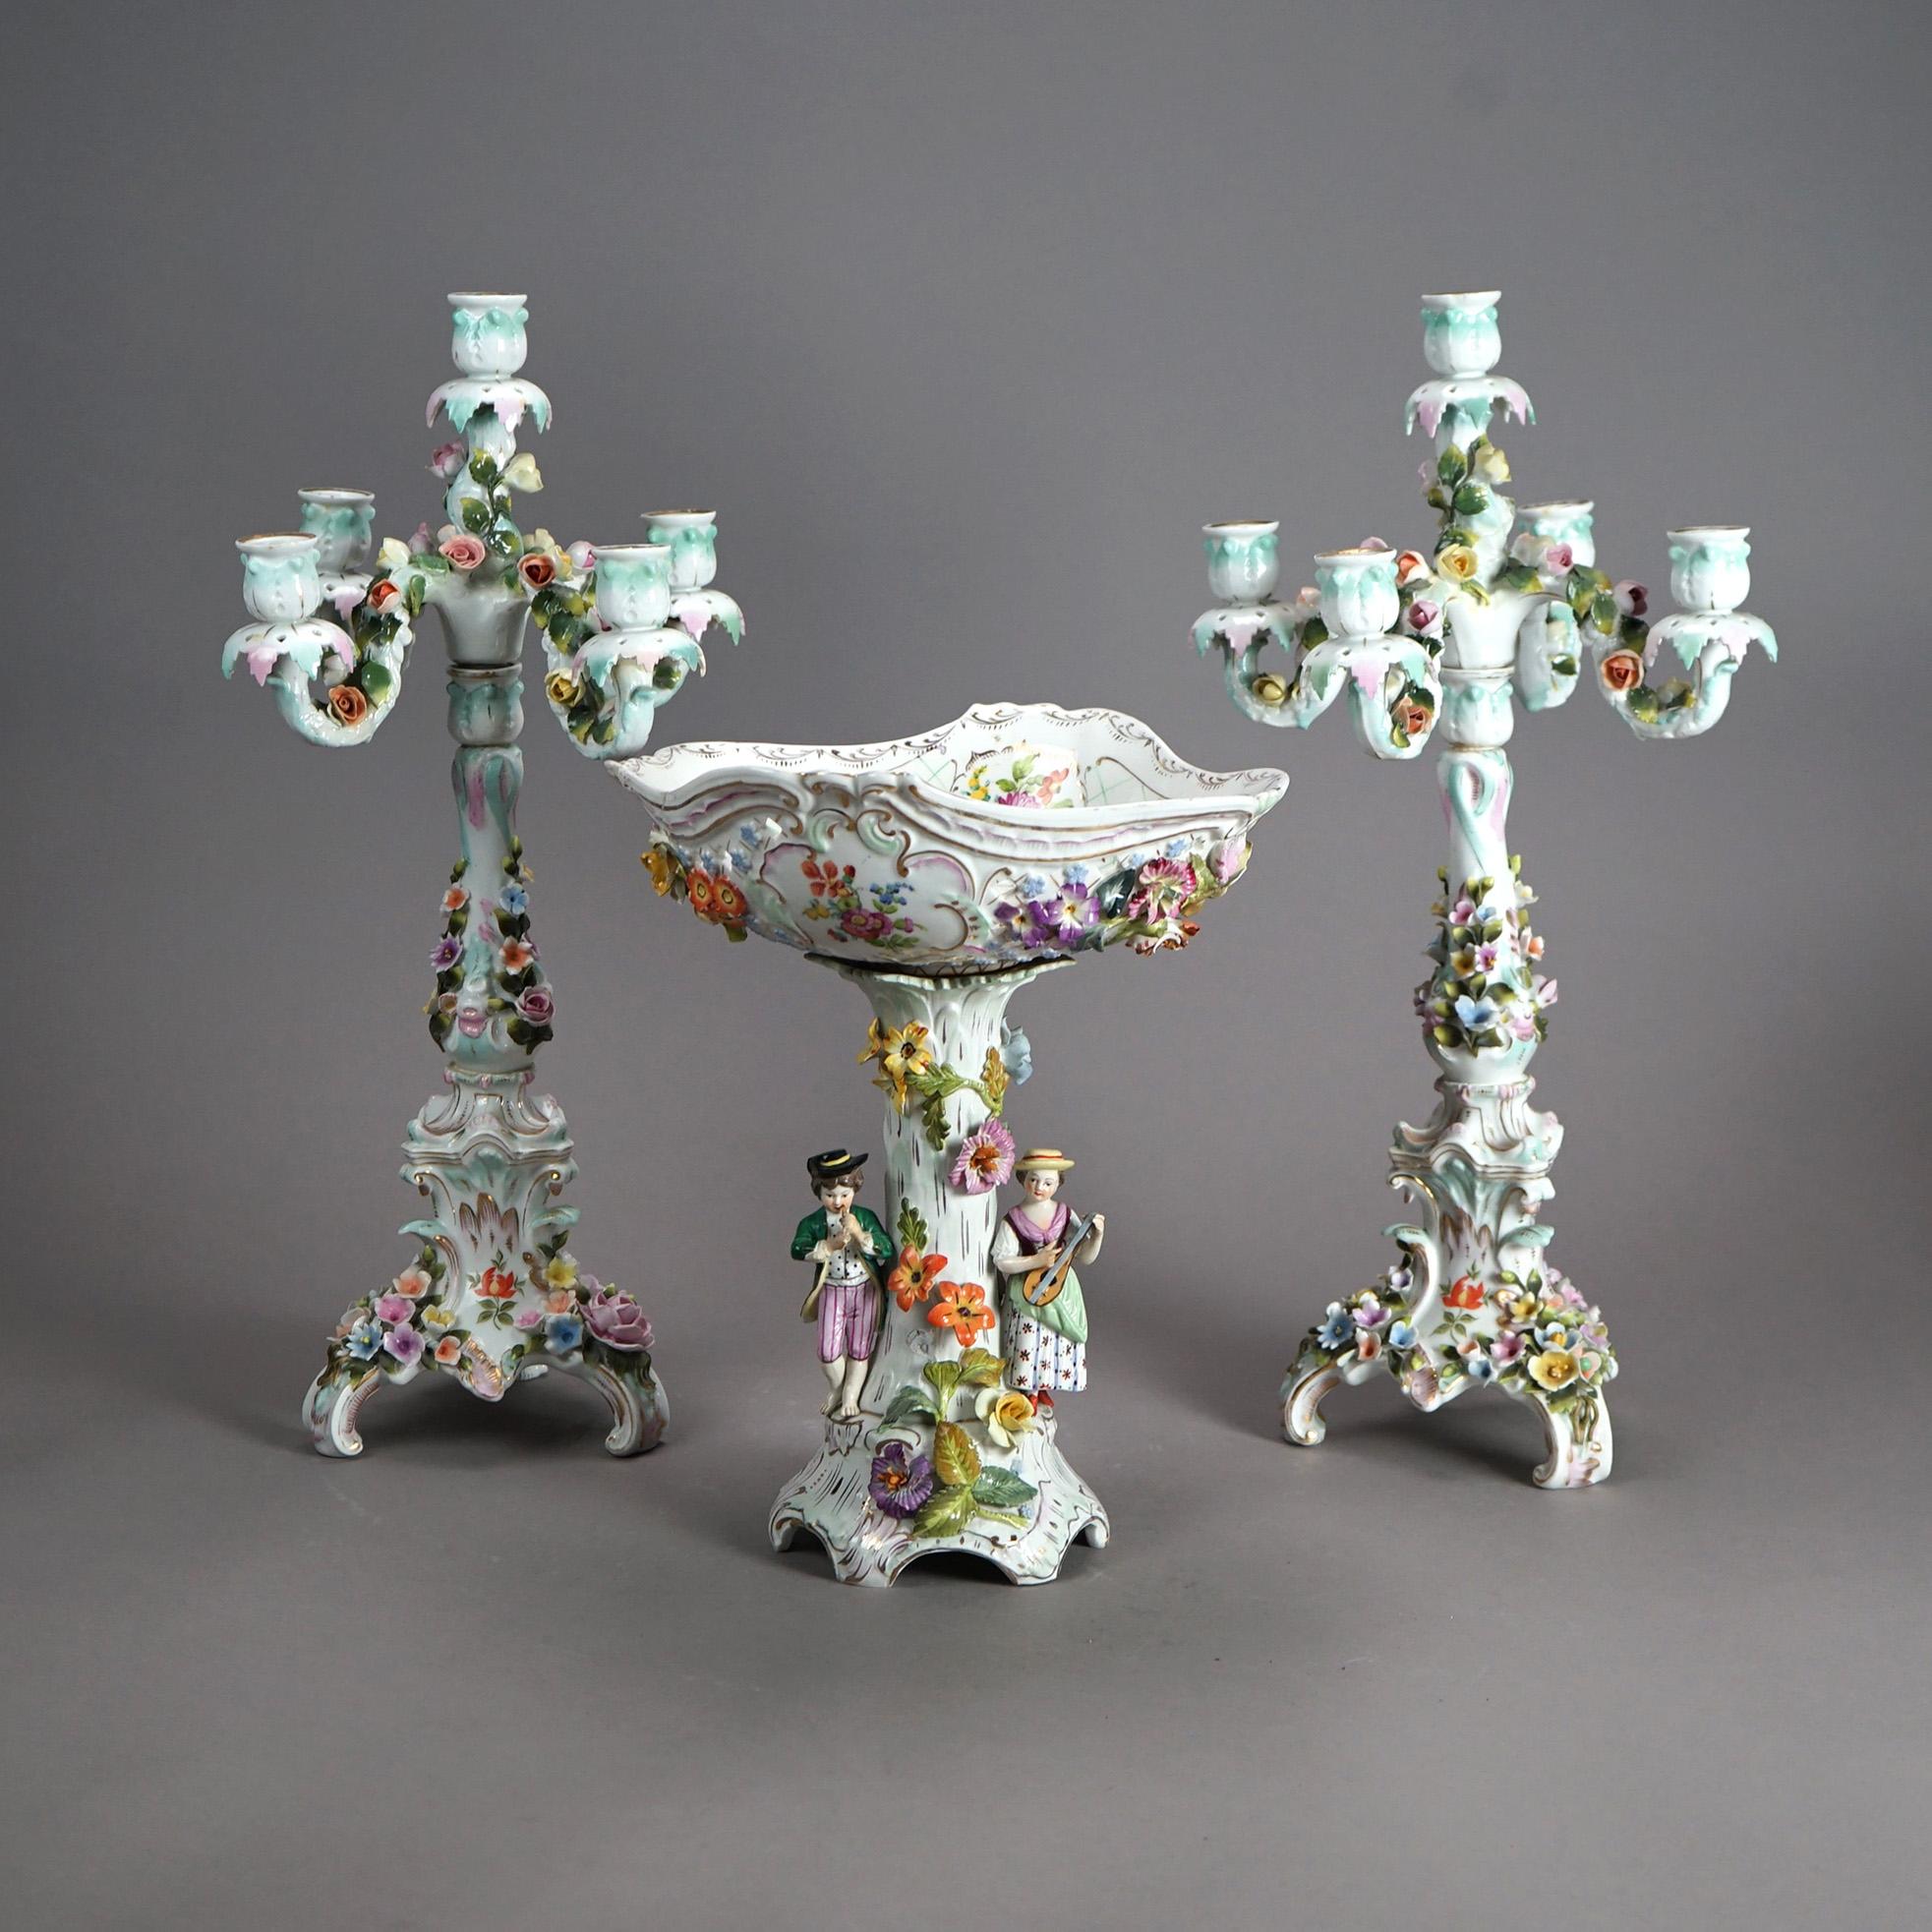 An antique garniture set offers Dresden porcelain construction with courting couple and applied floral elements; hand painted with gilt highlights; en verso blue maker mark as photographed; c1890

Measures - Compote 13.5